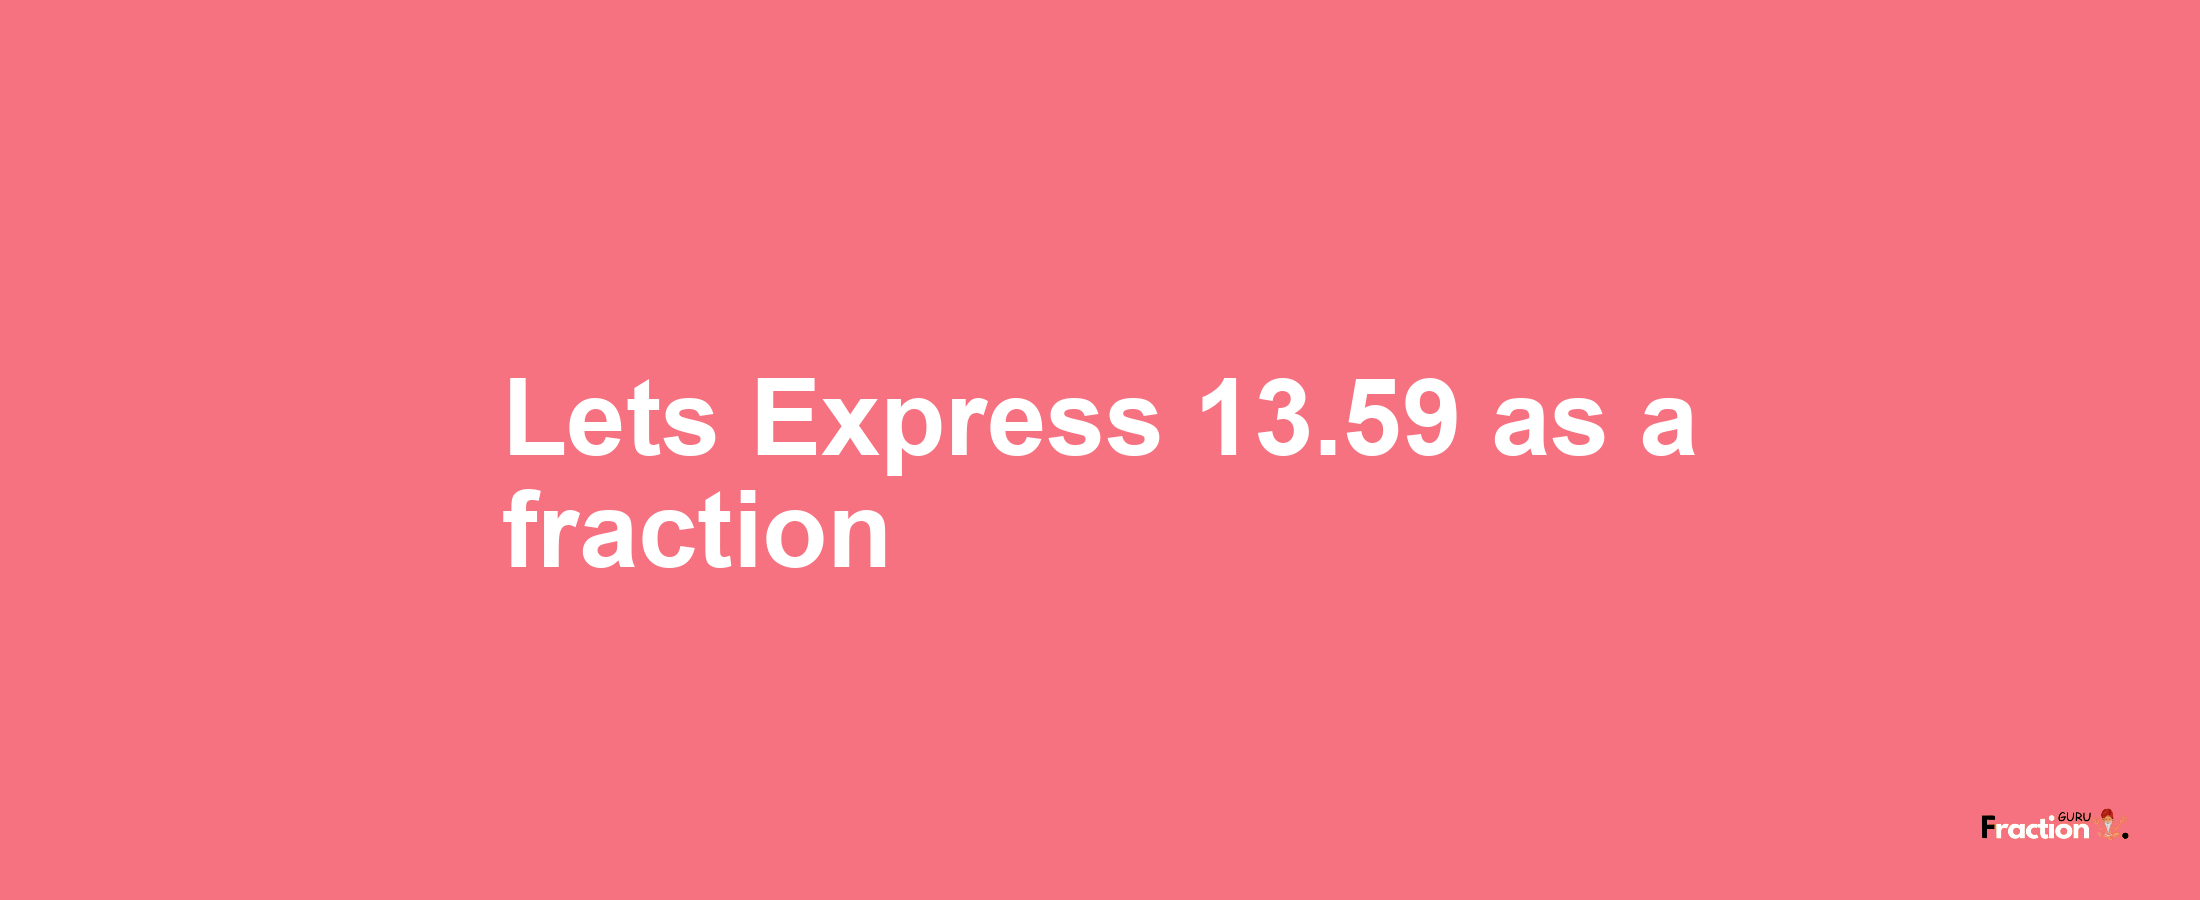 Lets Express 13.59 as afraction